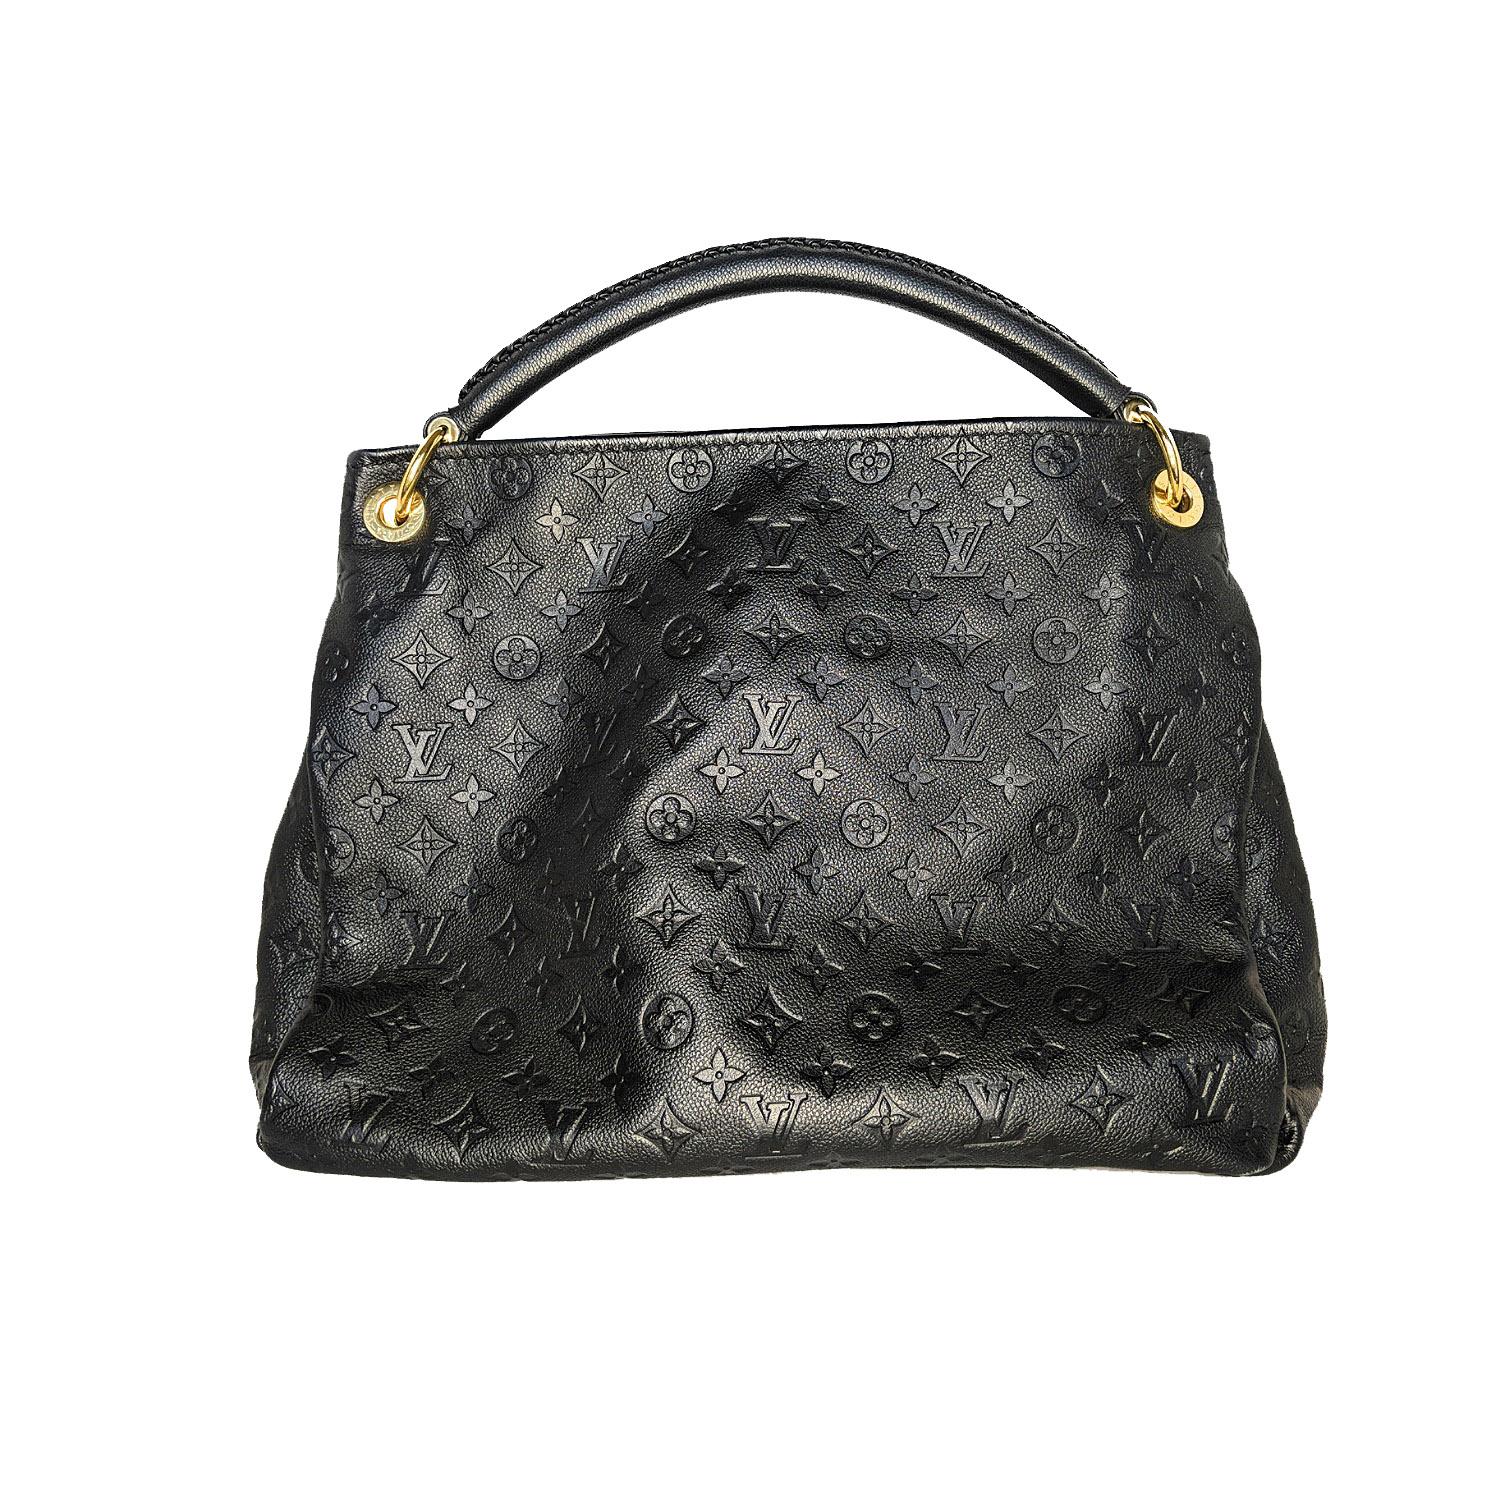 The Artsy MM handbag delights with its refined craftsmanship and functional features. Fashioned from supple Monogram Empreinte embossed leather, this quietly luxurious hobo features a handmade, cross-stitched handle that slips easily over the